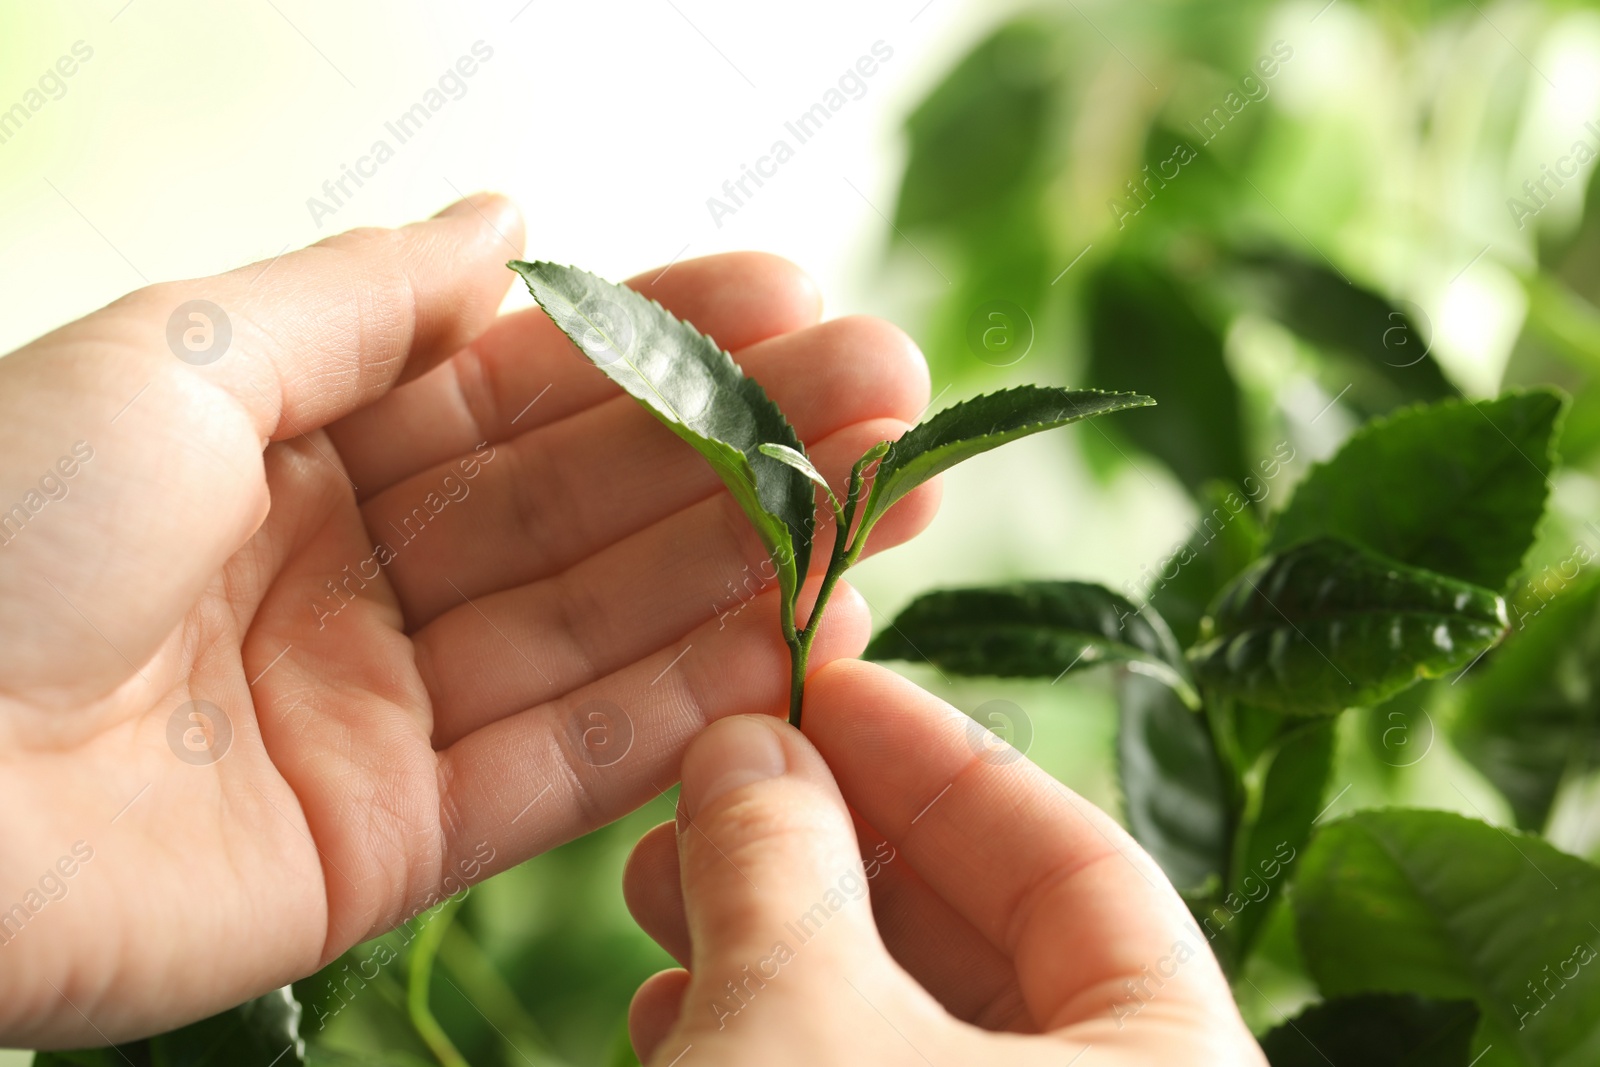 Photo of Farmer holding green leaves near tea plant against blurred background, closeup